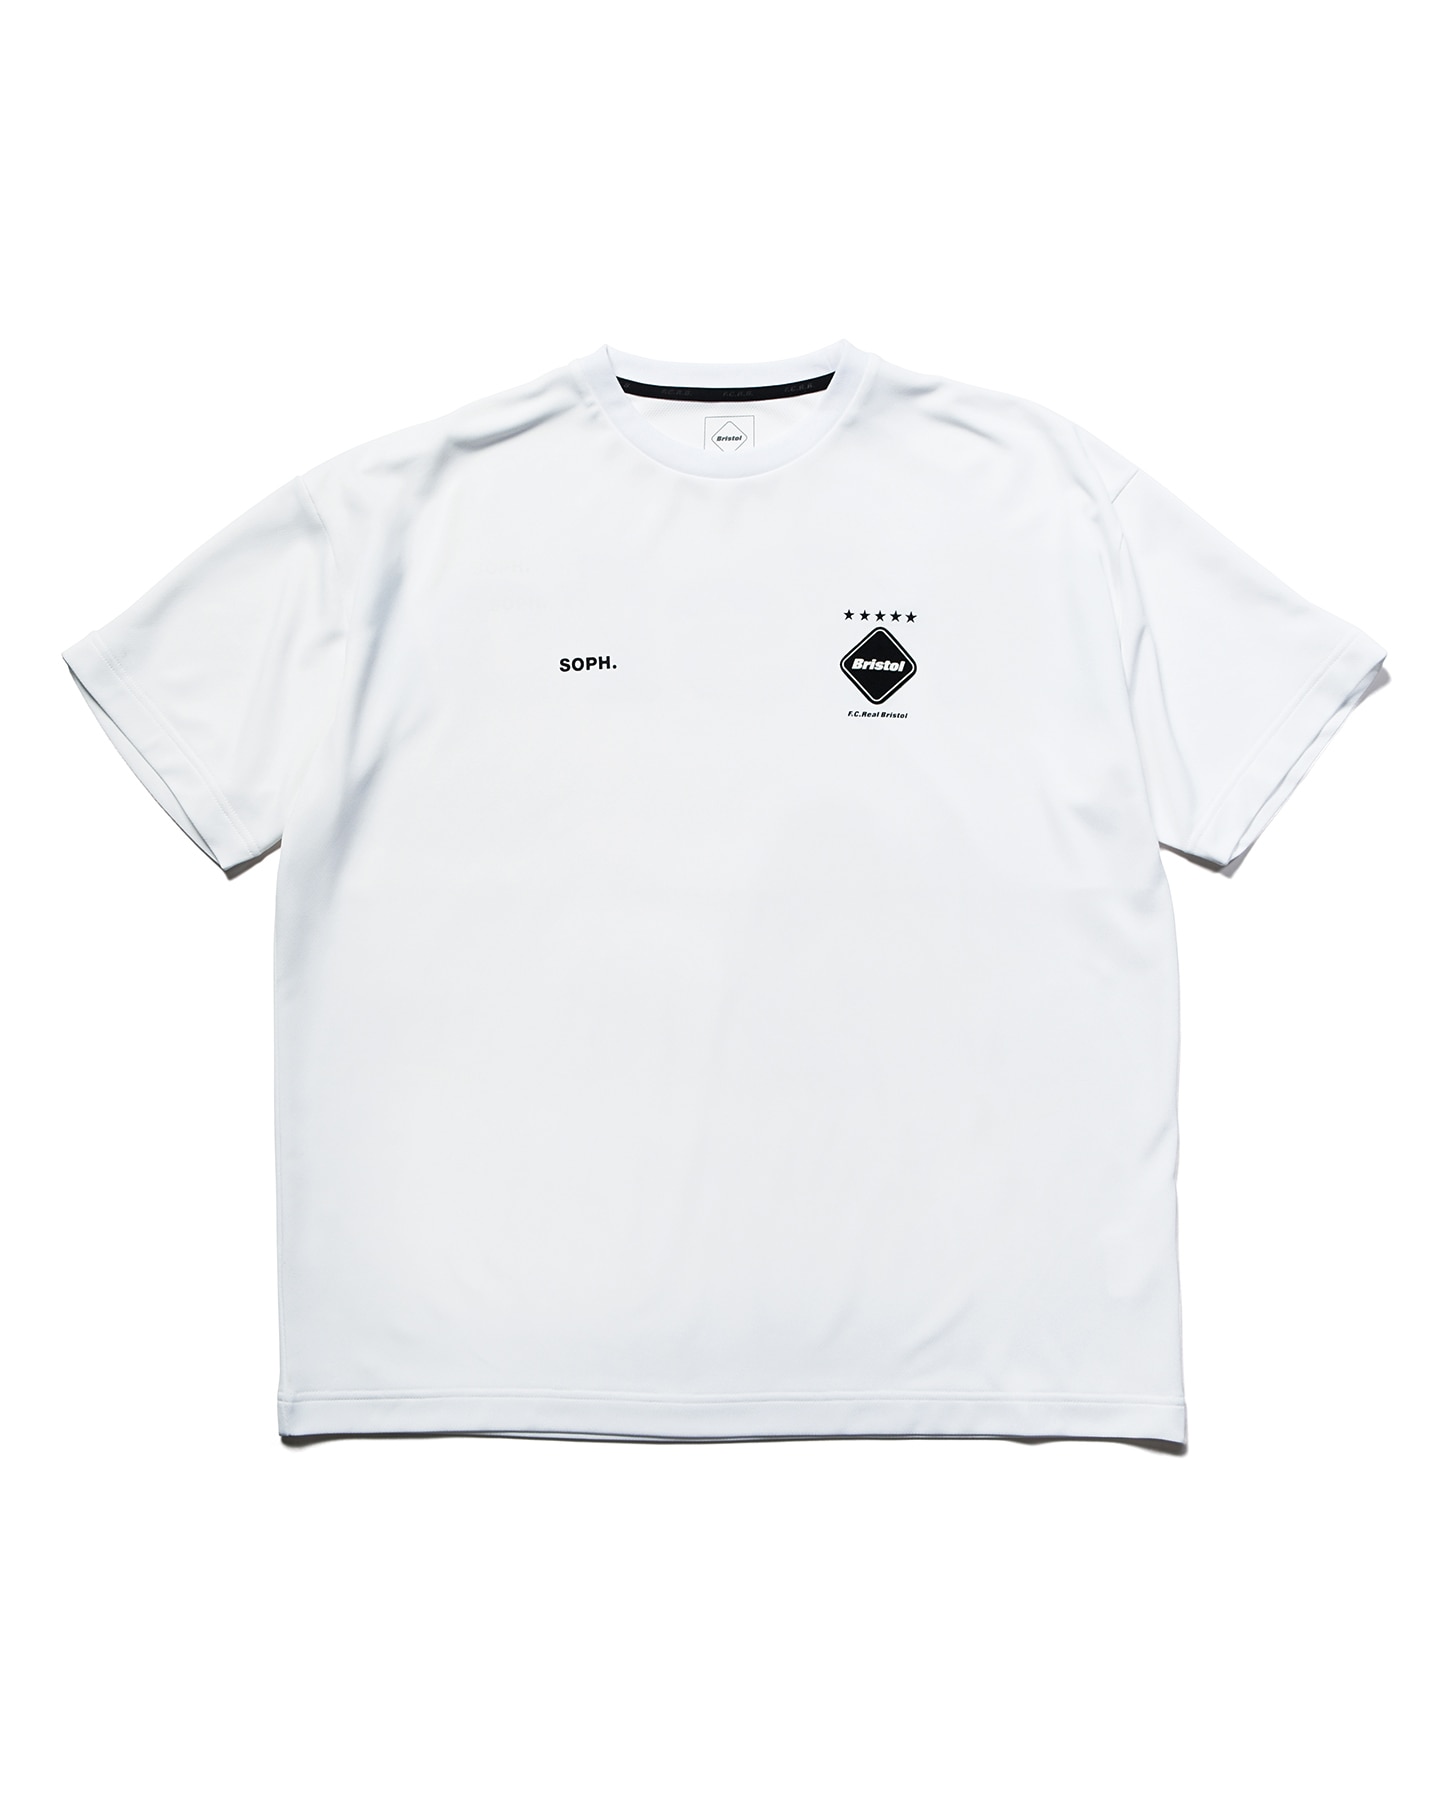 S 新品 FCRB 22SS BIG LOGO WIDE TEE WHITE